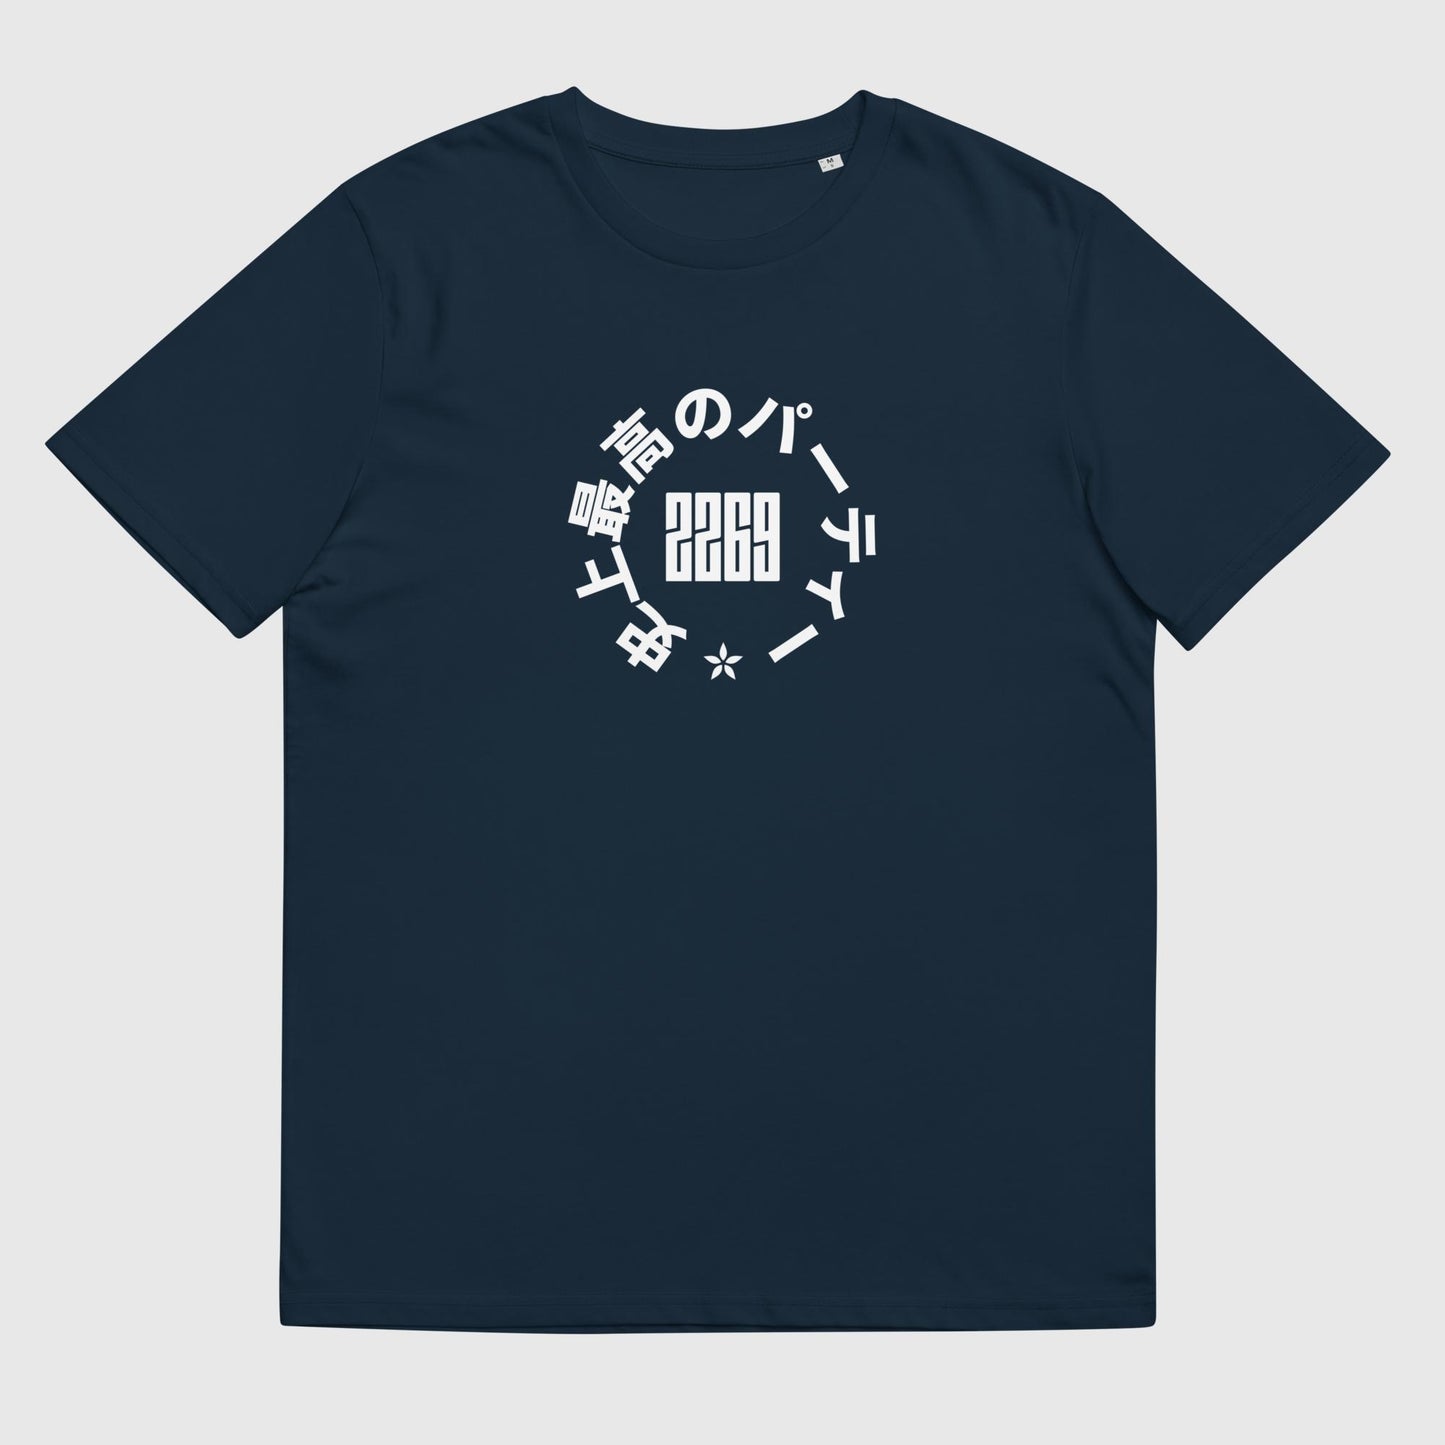 Men's navy organic cotton t-shirt with Japanese 2269 party circle